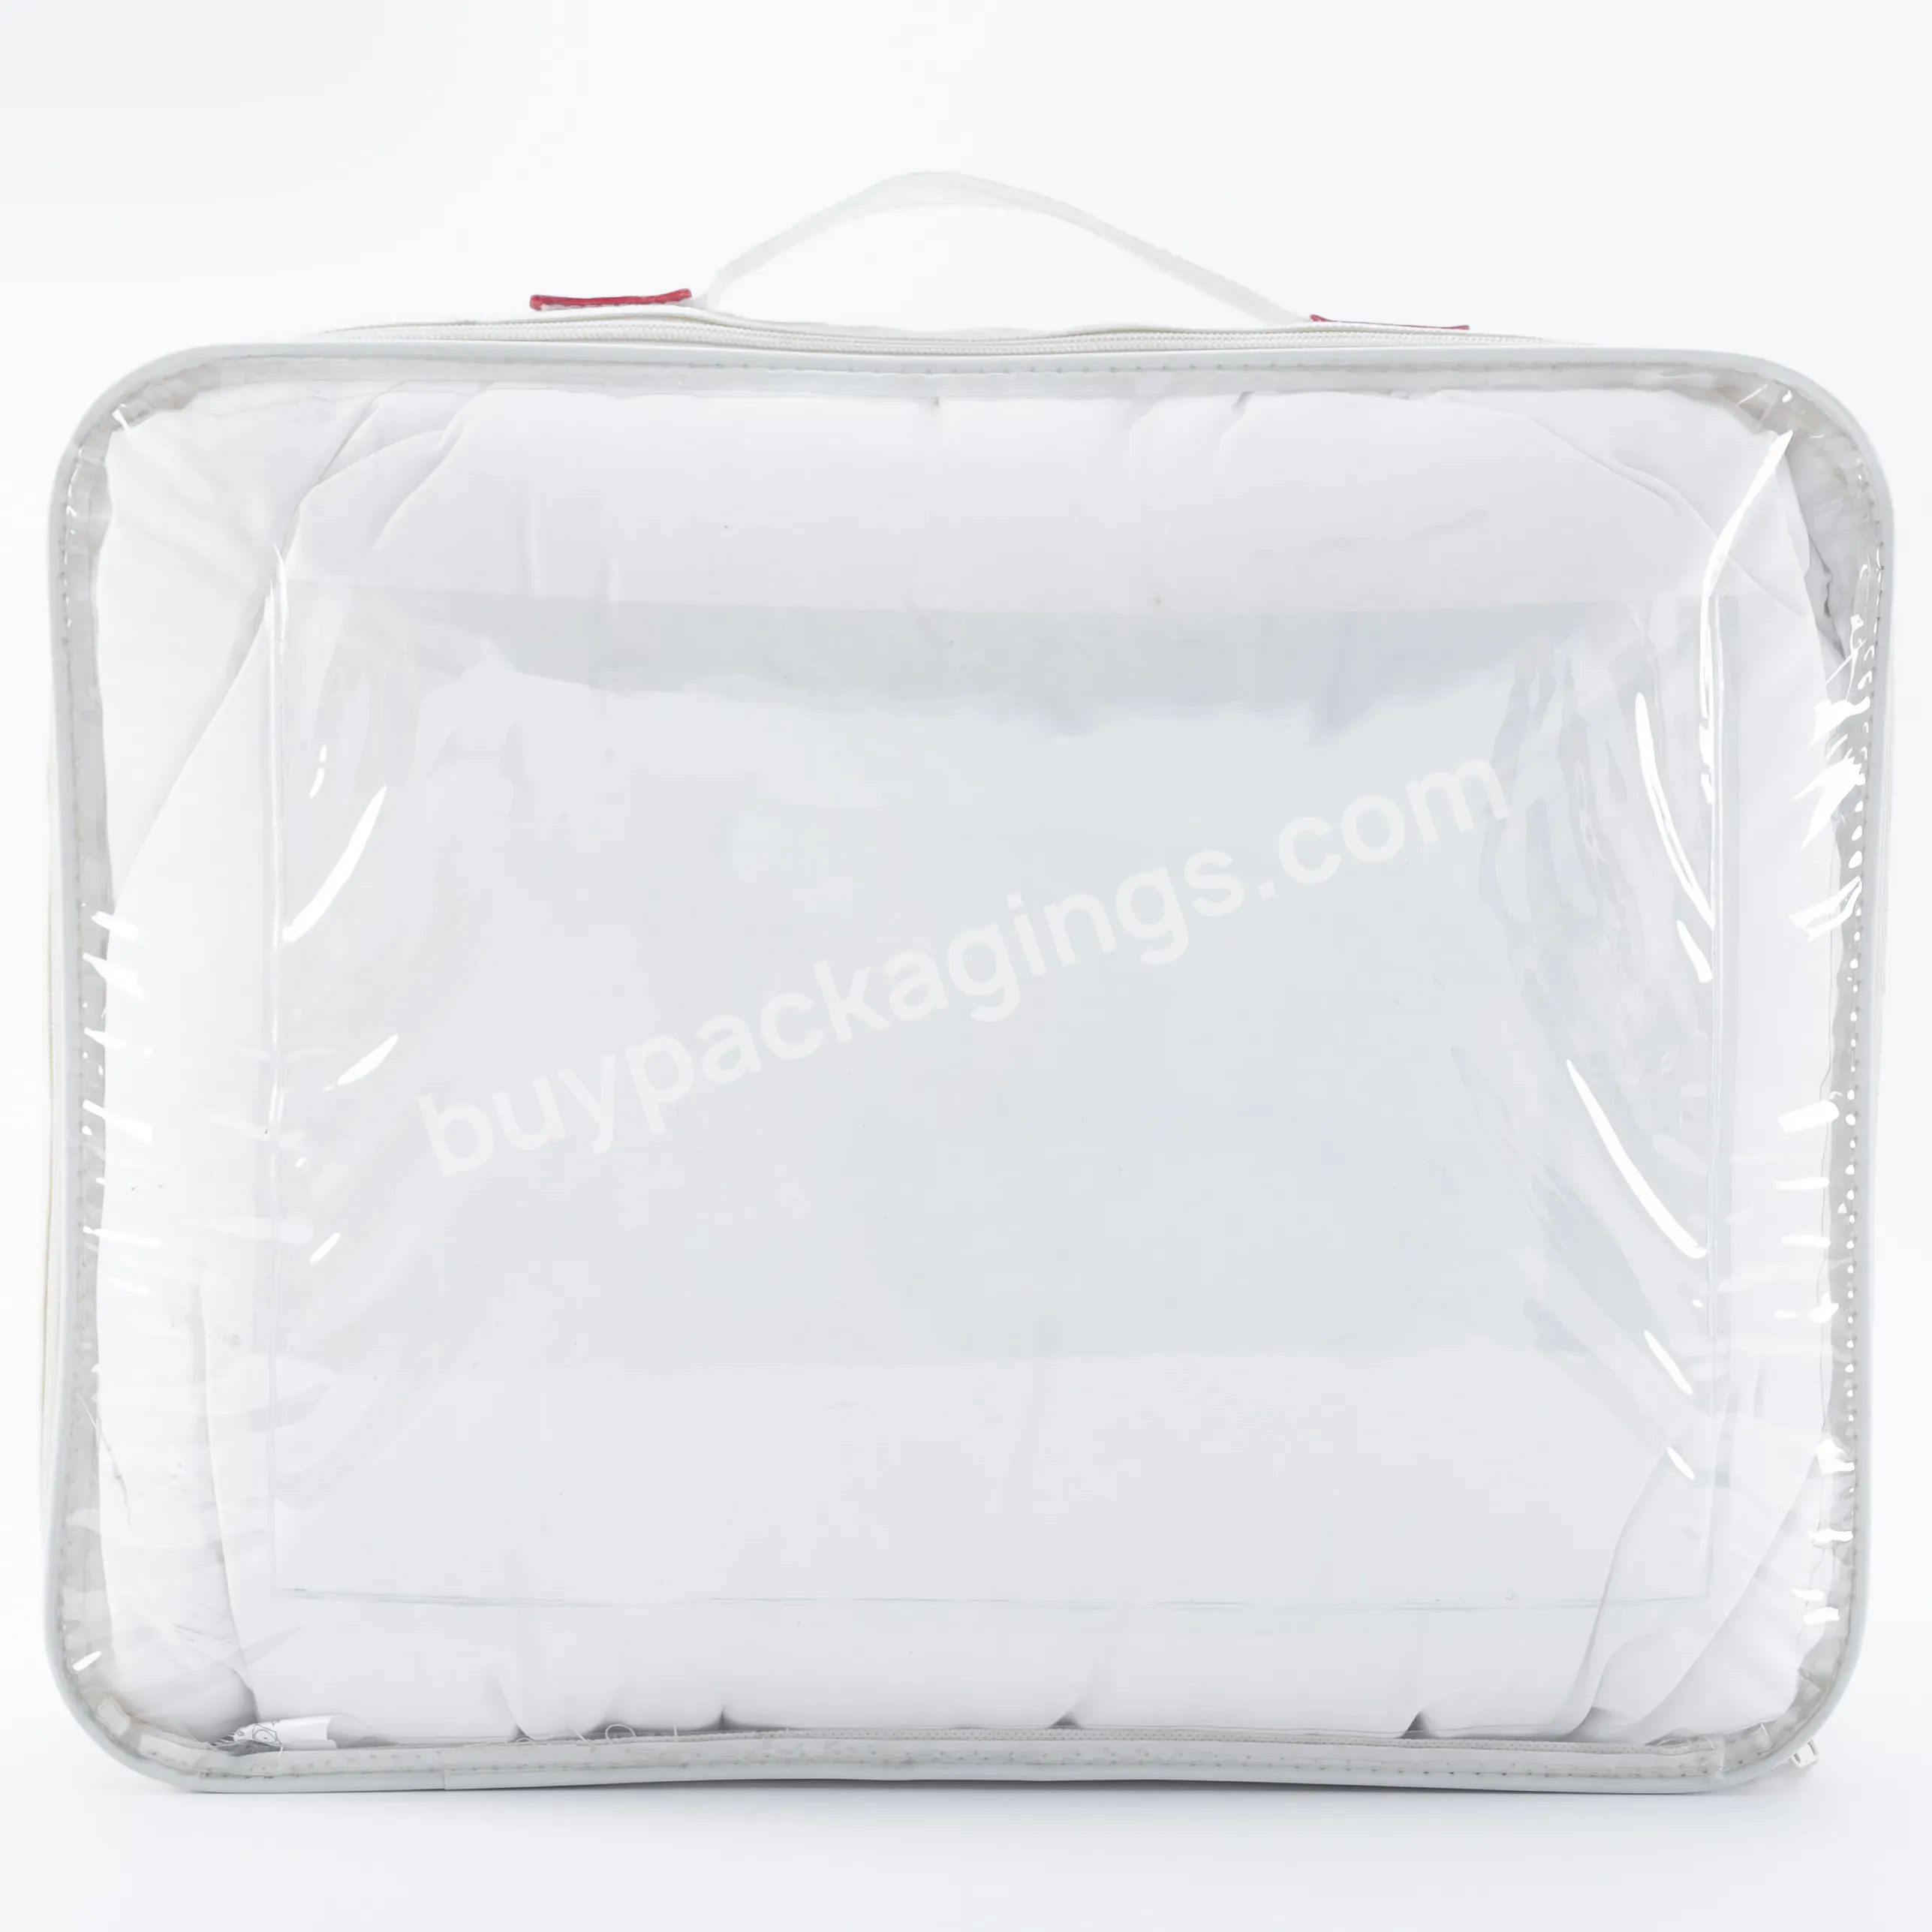 Transparent Pvc And Non Woven Wire Bags For Packaging Blanket - Buy Blanket Packaging Bags,Pvc Bag For Blanket,Wire Bags.